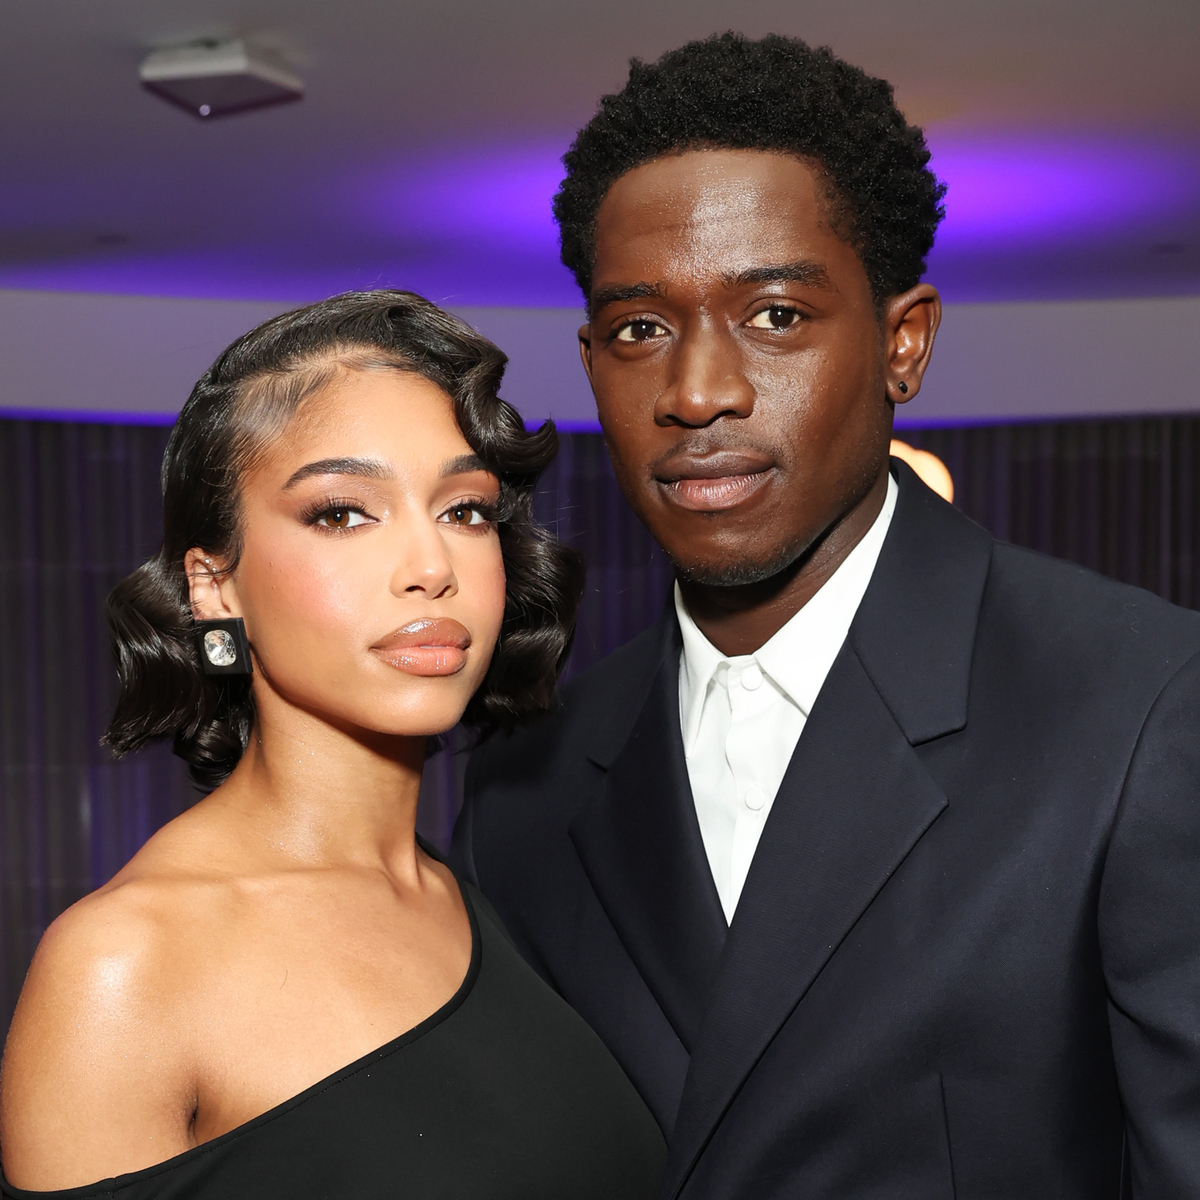 Lori Harvey and Damson Idris Break Up After One Year of Dating